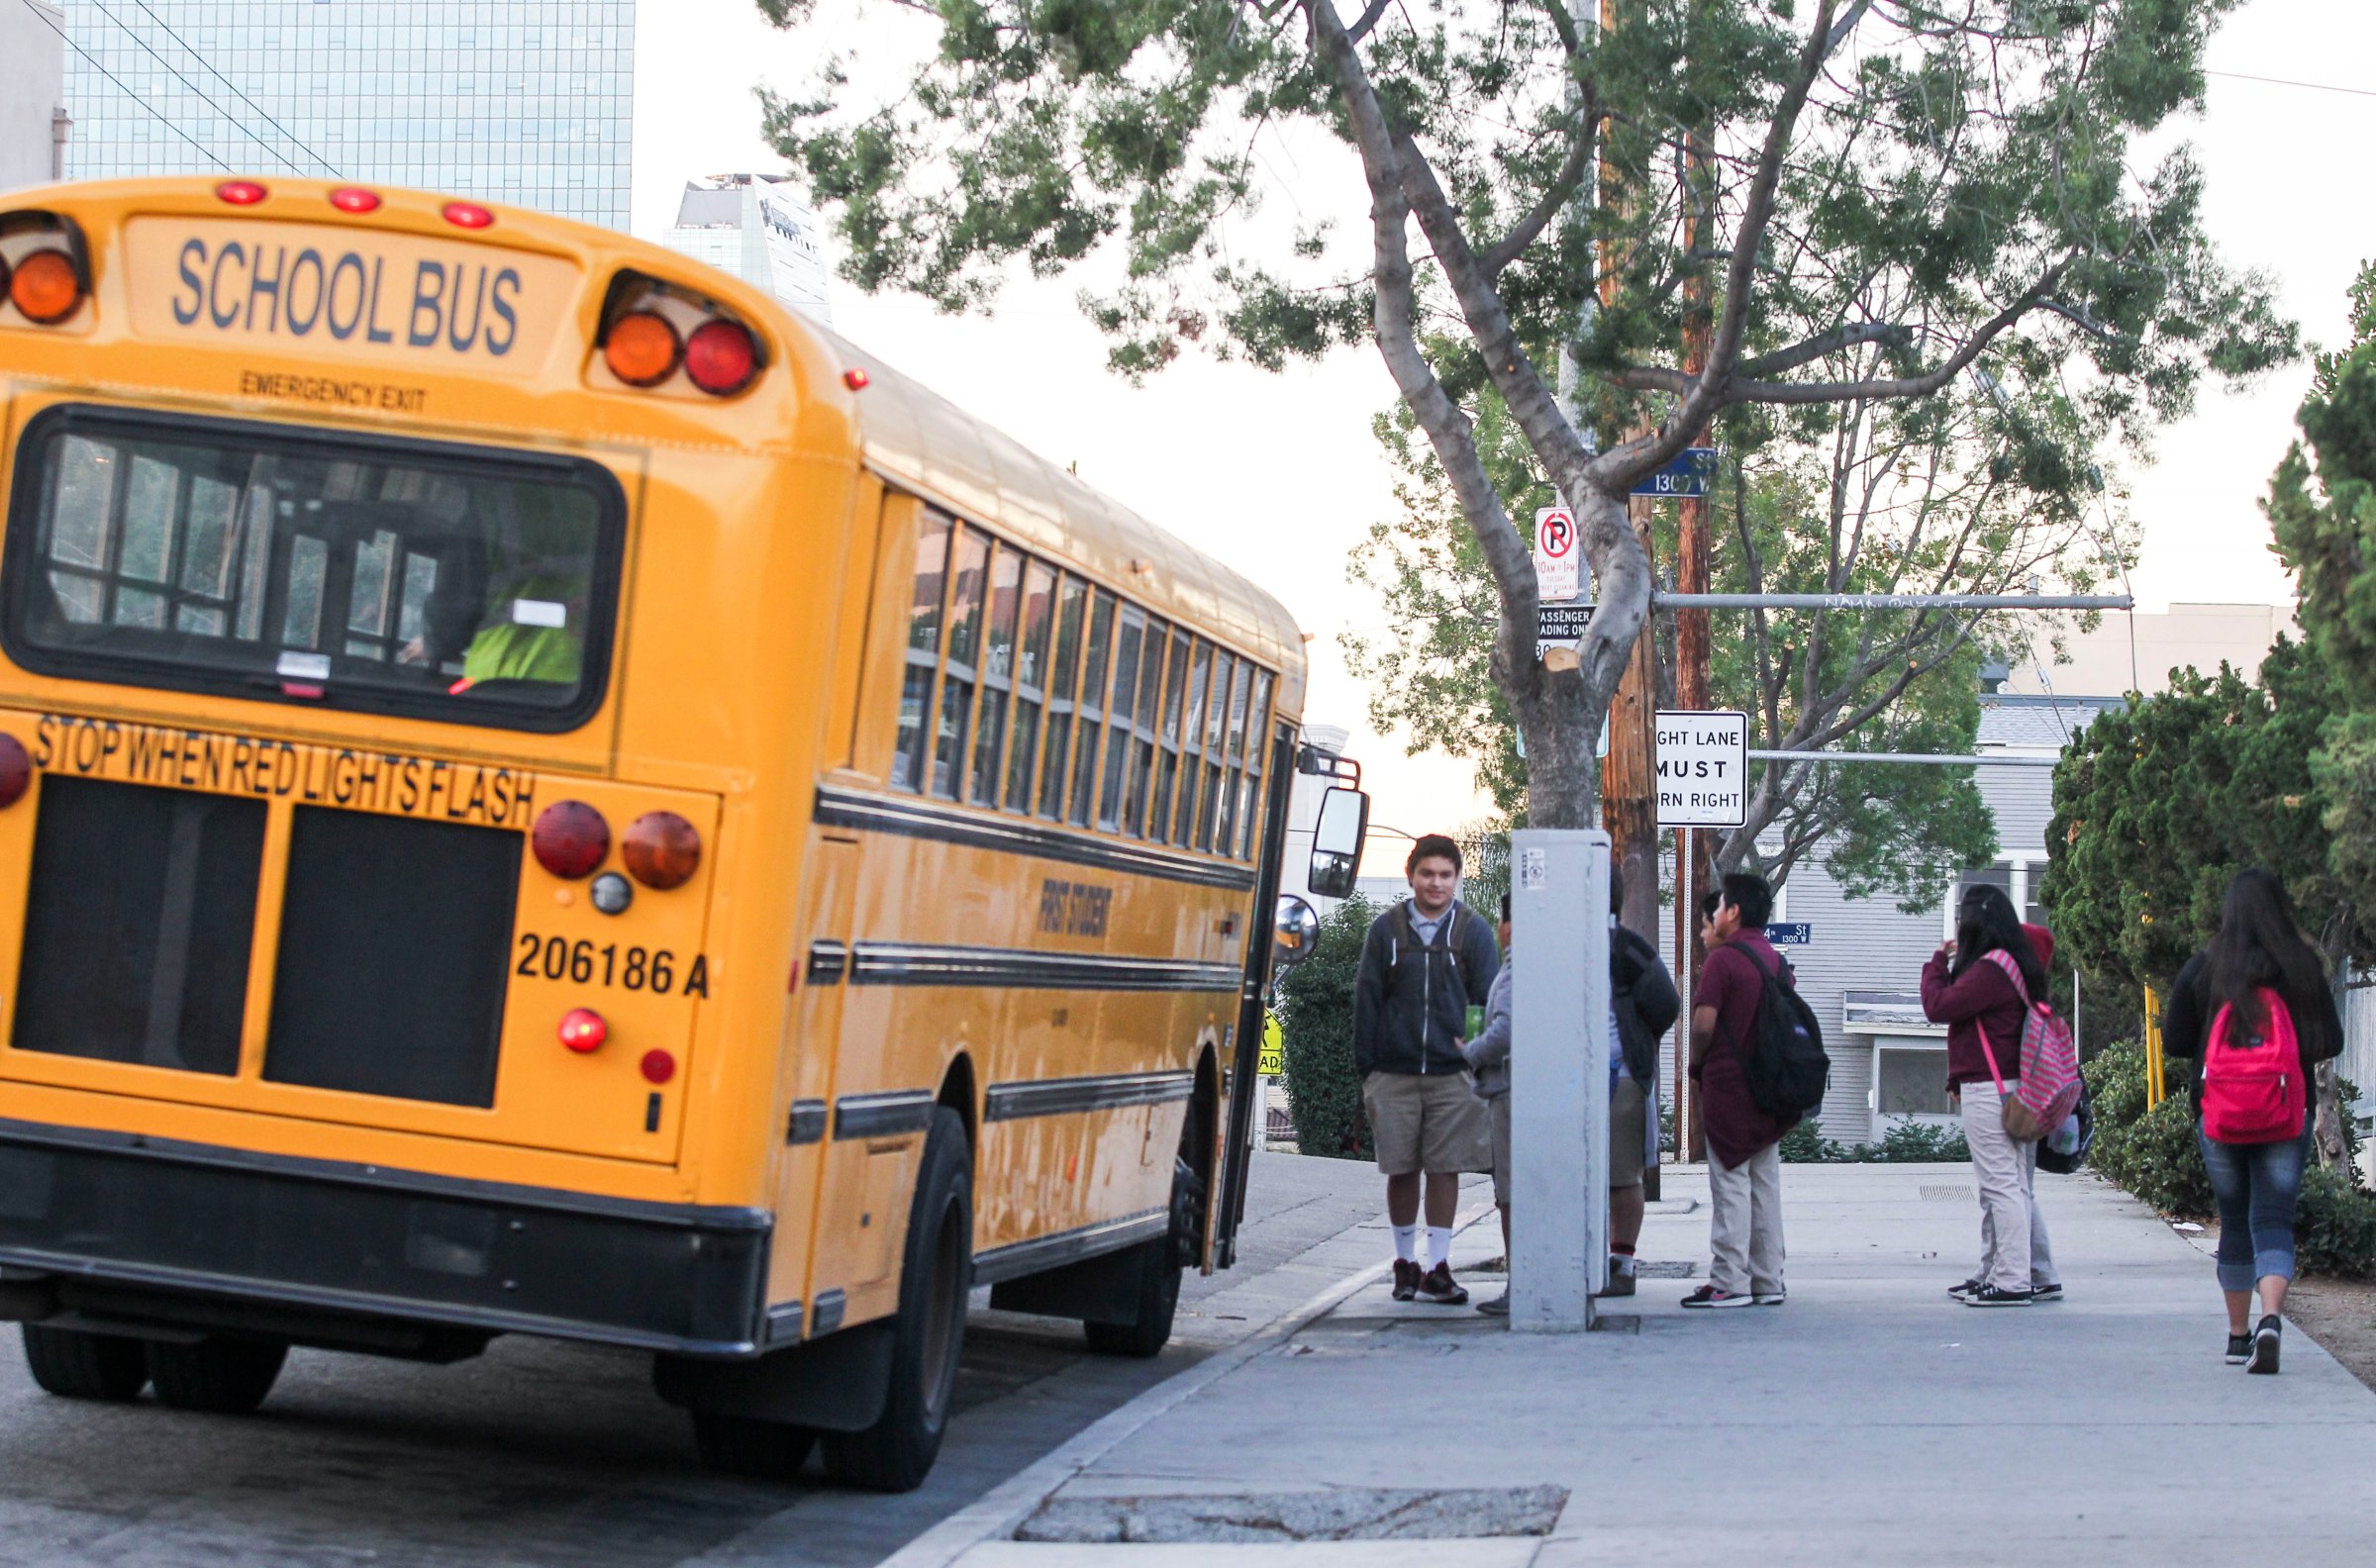 Students line up for a school bus outside a school in Los Angeles on December 16, 2015.